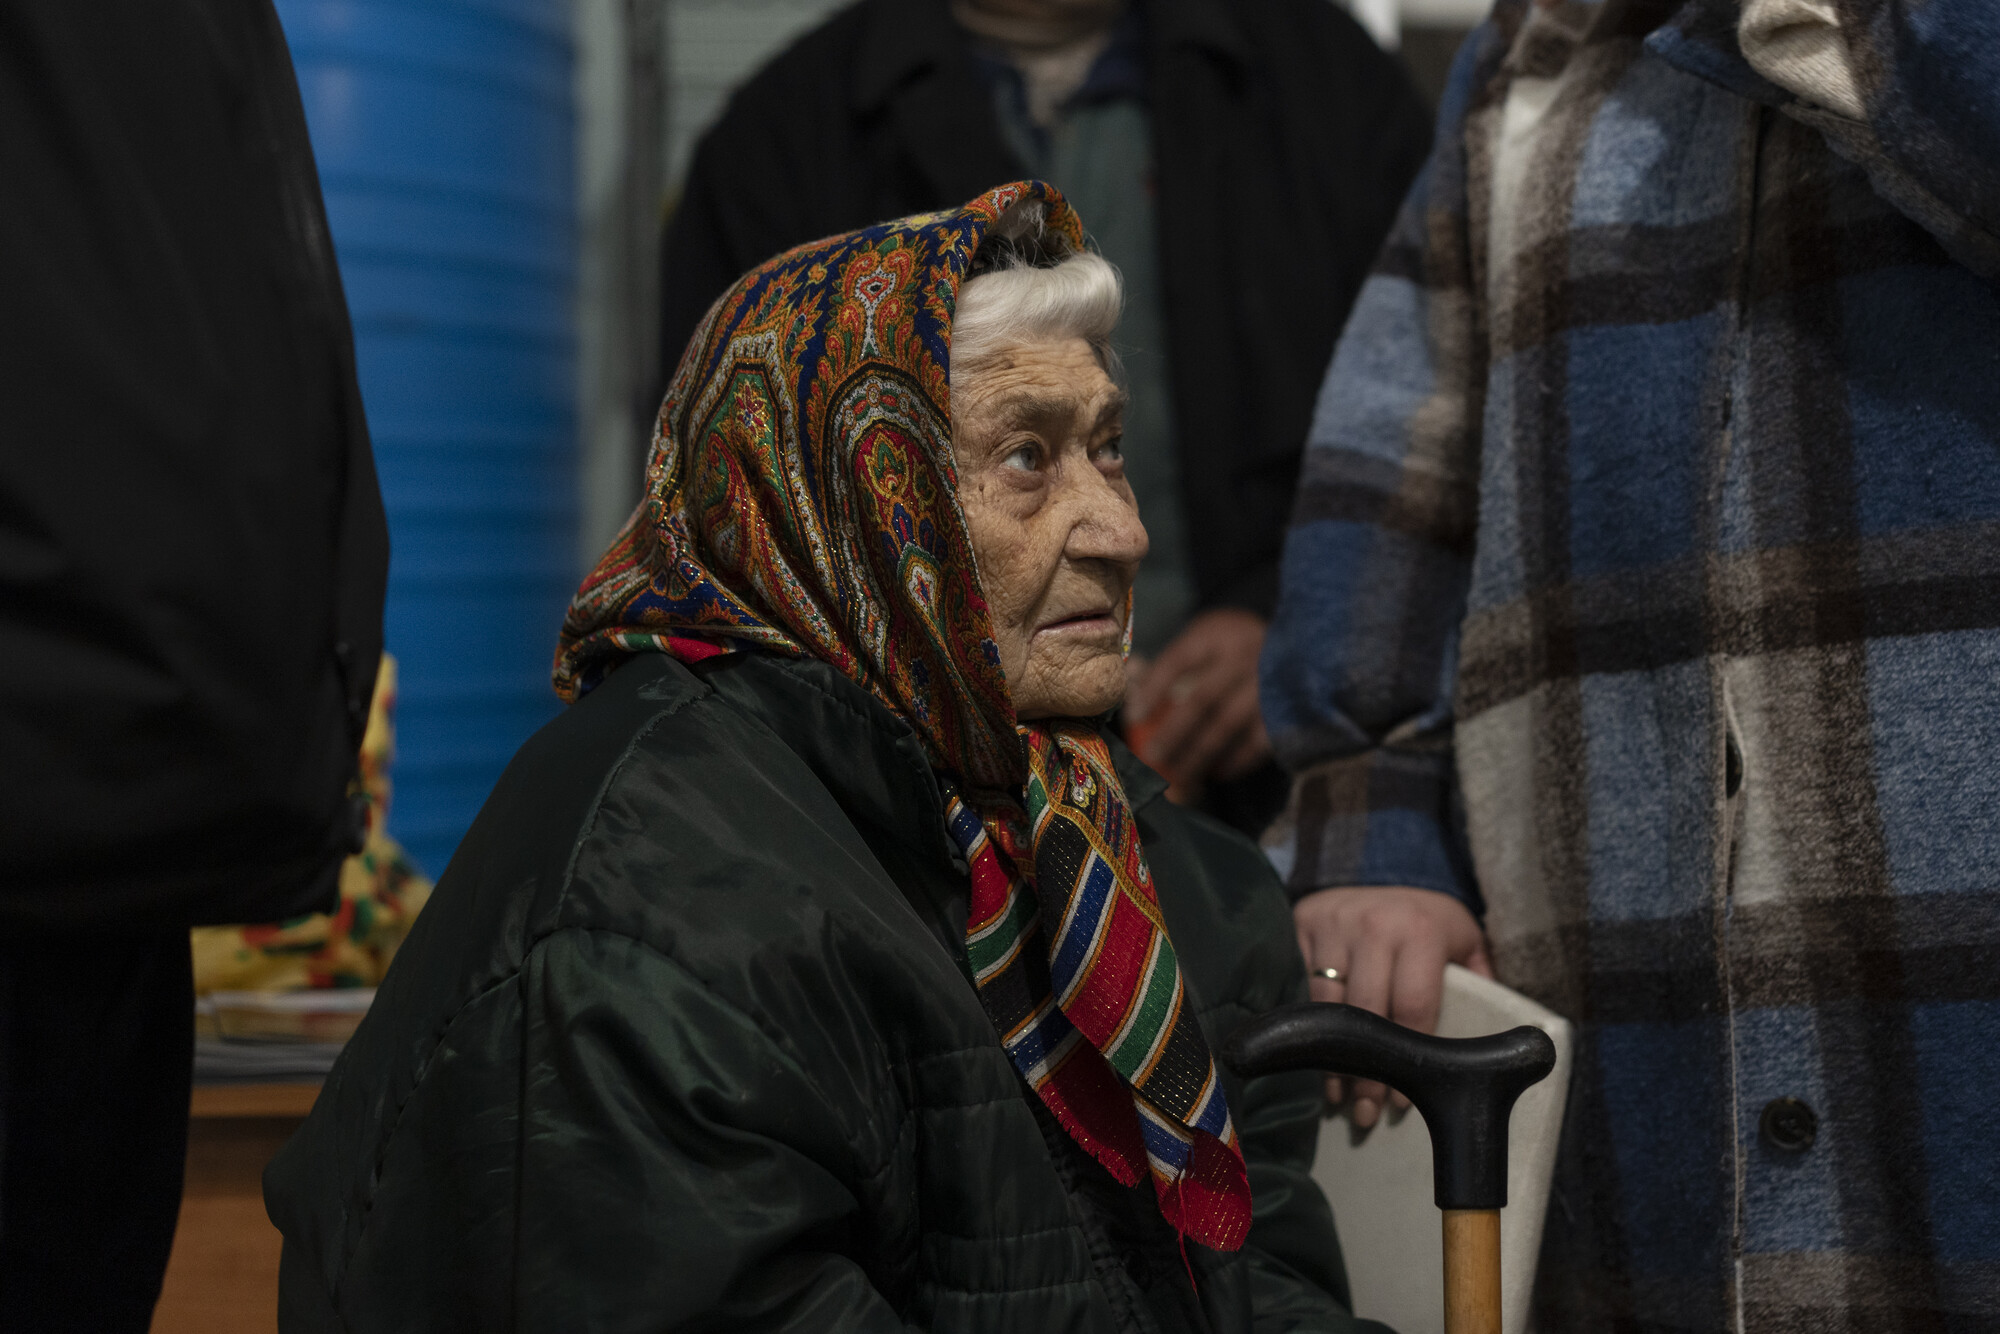 Jan Egeland with 91 year old Milana, in Zaporizhzhia reception centre. Up to 50 people managed to cross into Zaporizhzhia on Tuesday 22 November. 91 year old Ludmila and her daughter, 64-year-old Ludmila said they could no longer live in the basement of their bombed out house in Mariupol: ‘We had to leave or we would die’.
They were welcomed at a reception centre run by several organizations including NRC, where they register for a range of services and receive a hot meal.